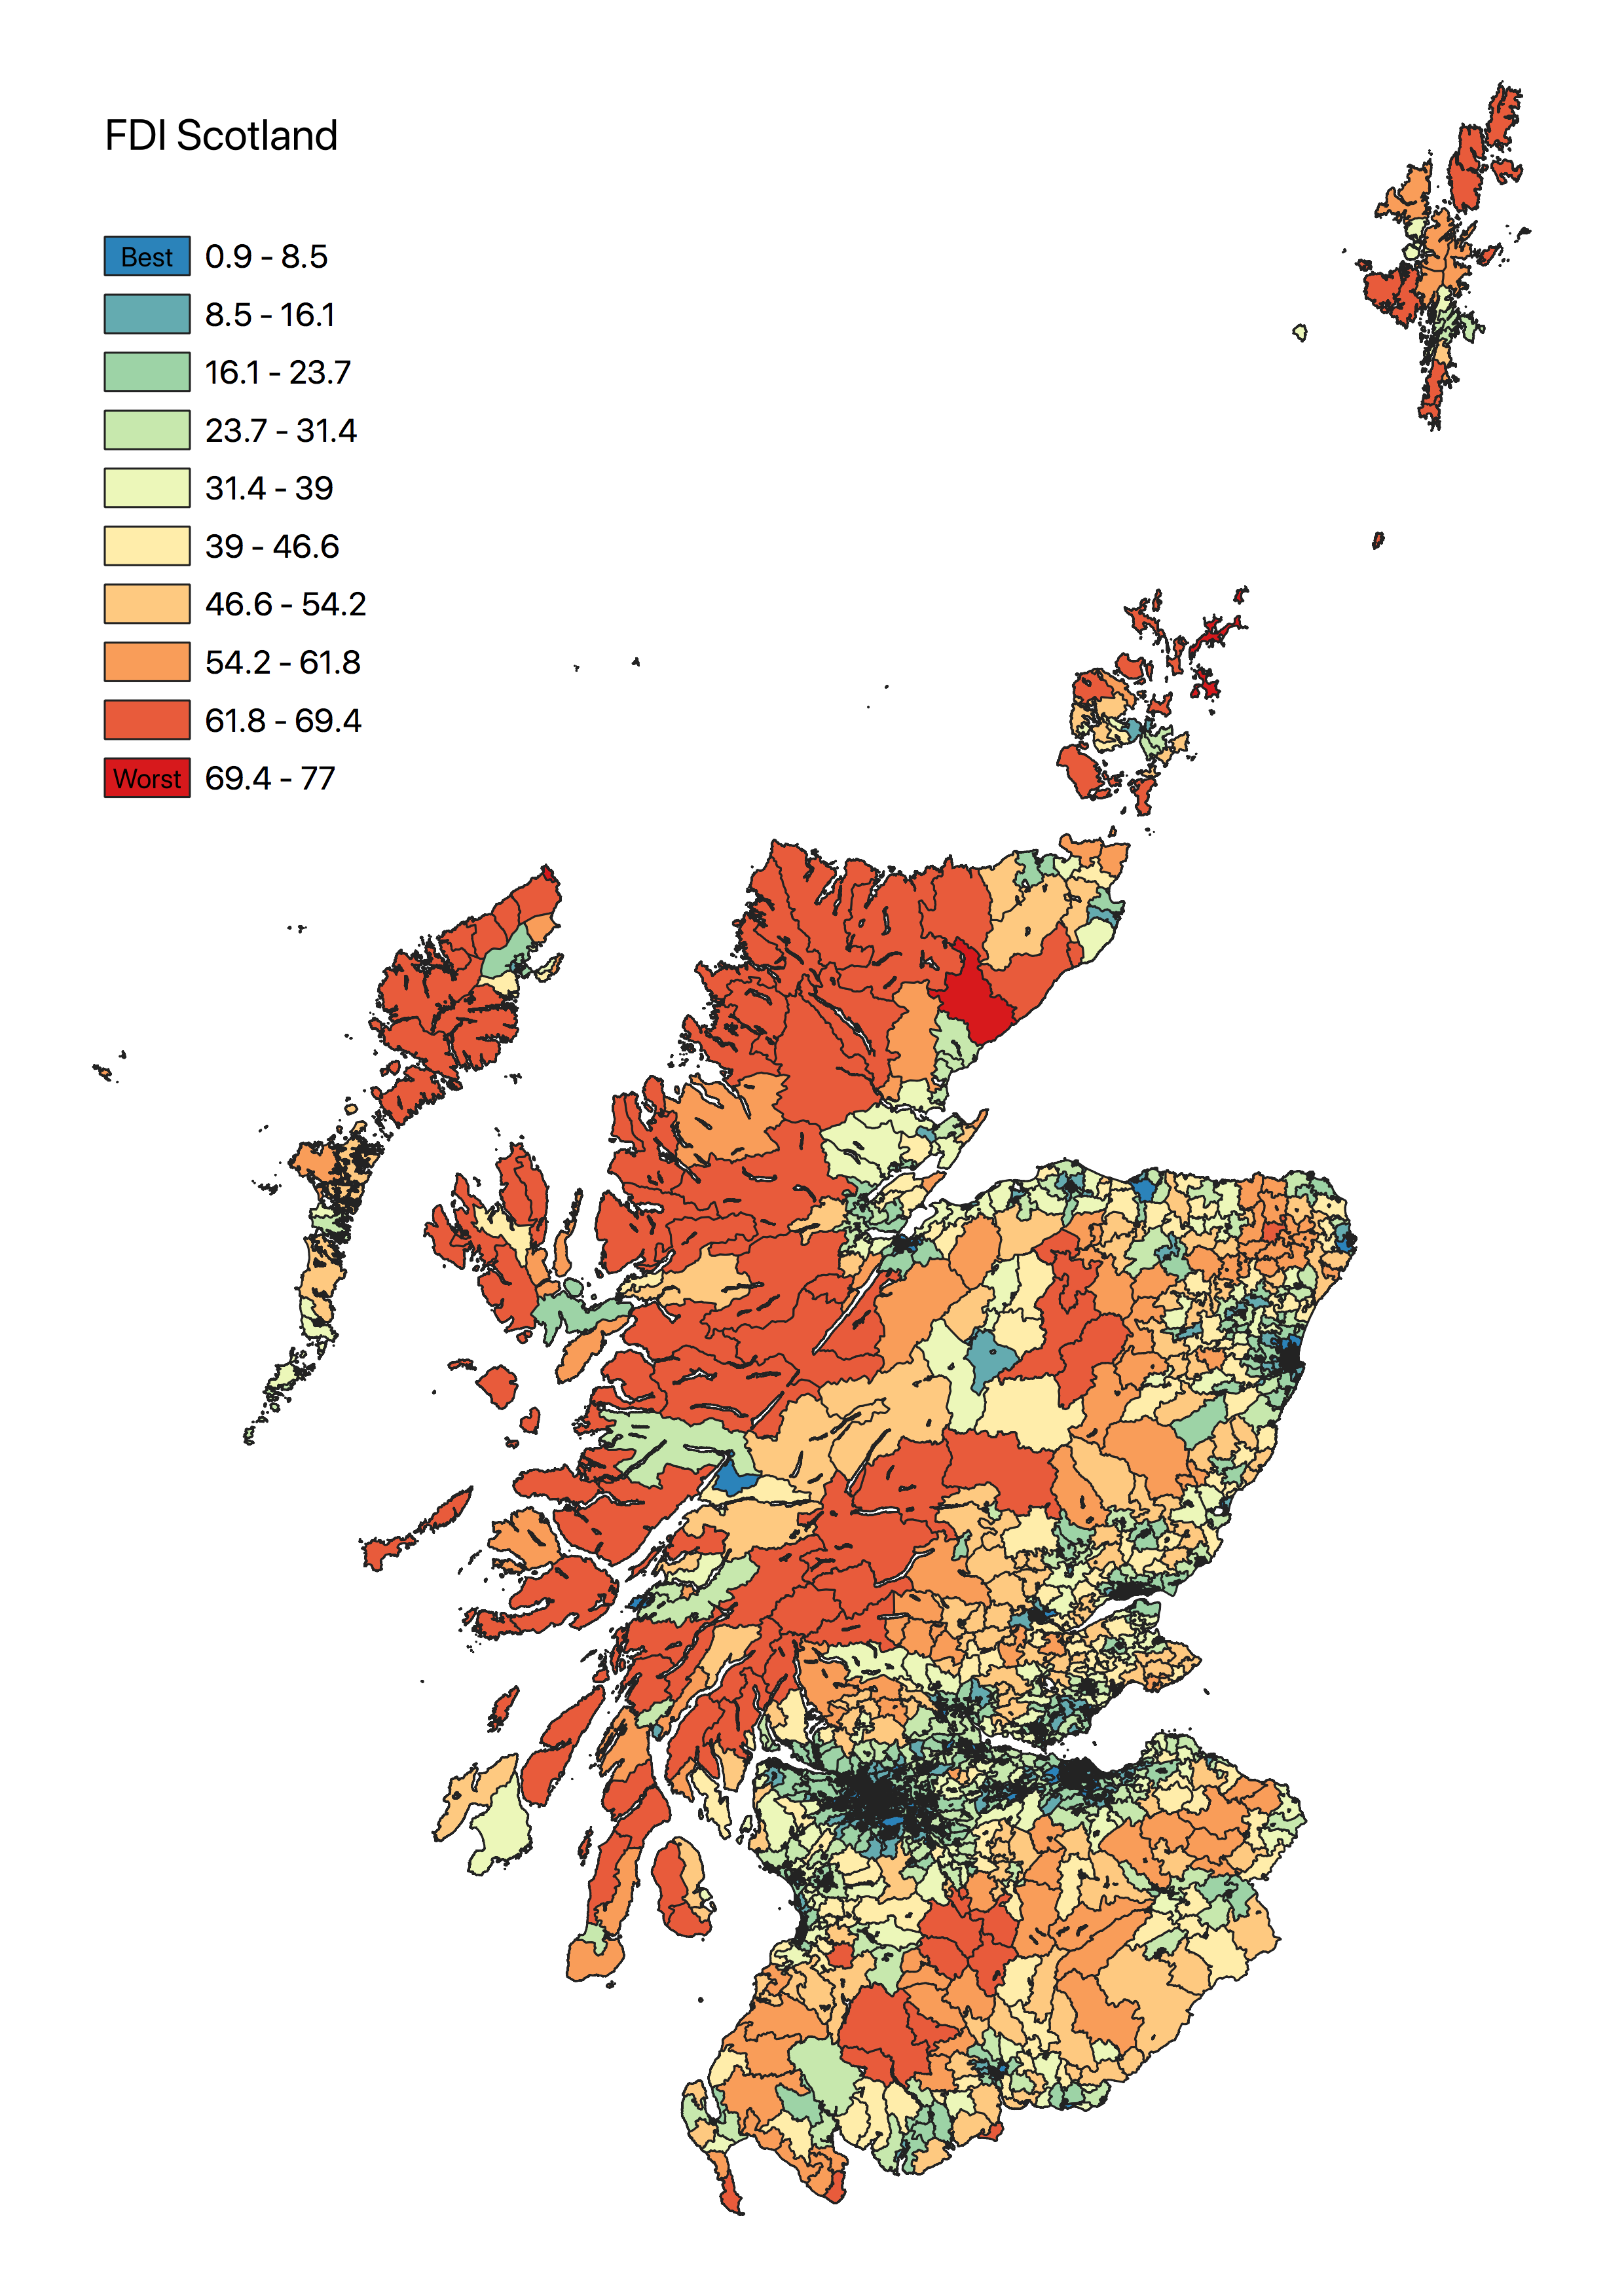 Map of FDI Score in Scotland - highest scores in the North, with pockets of high scores elsewhere